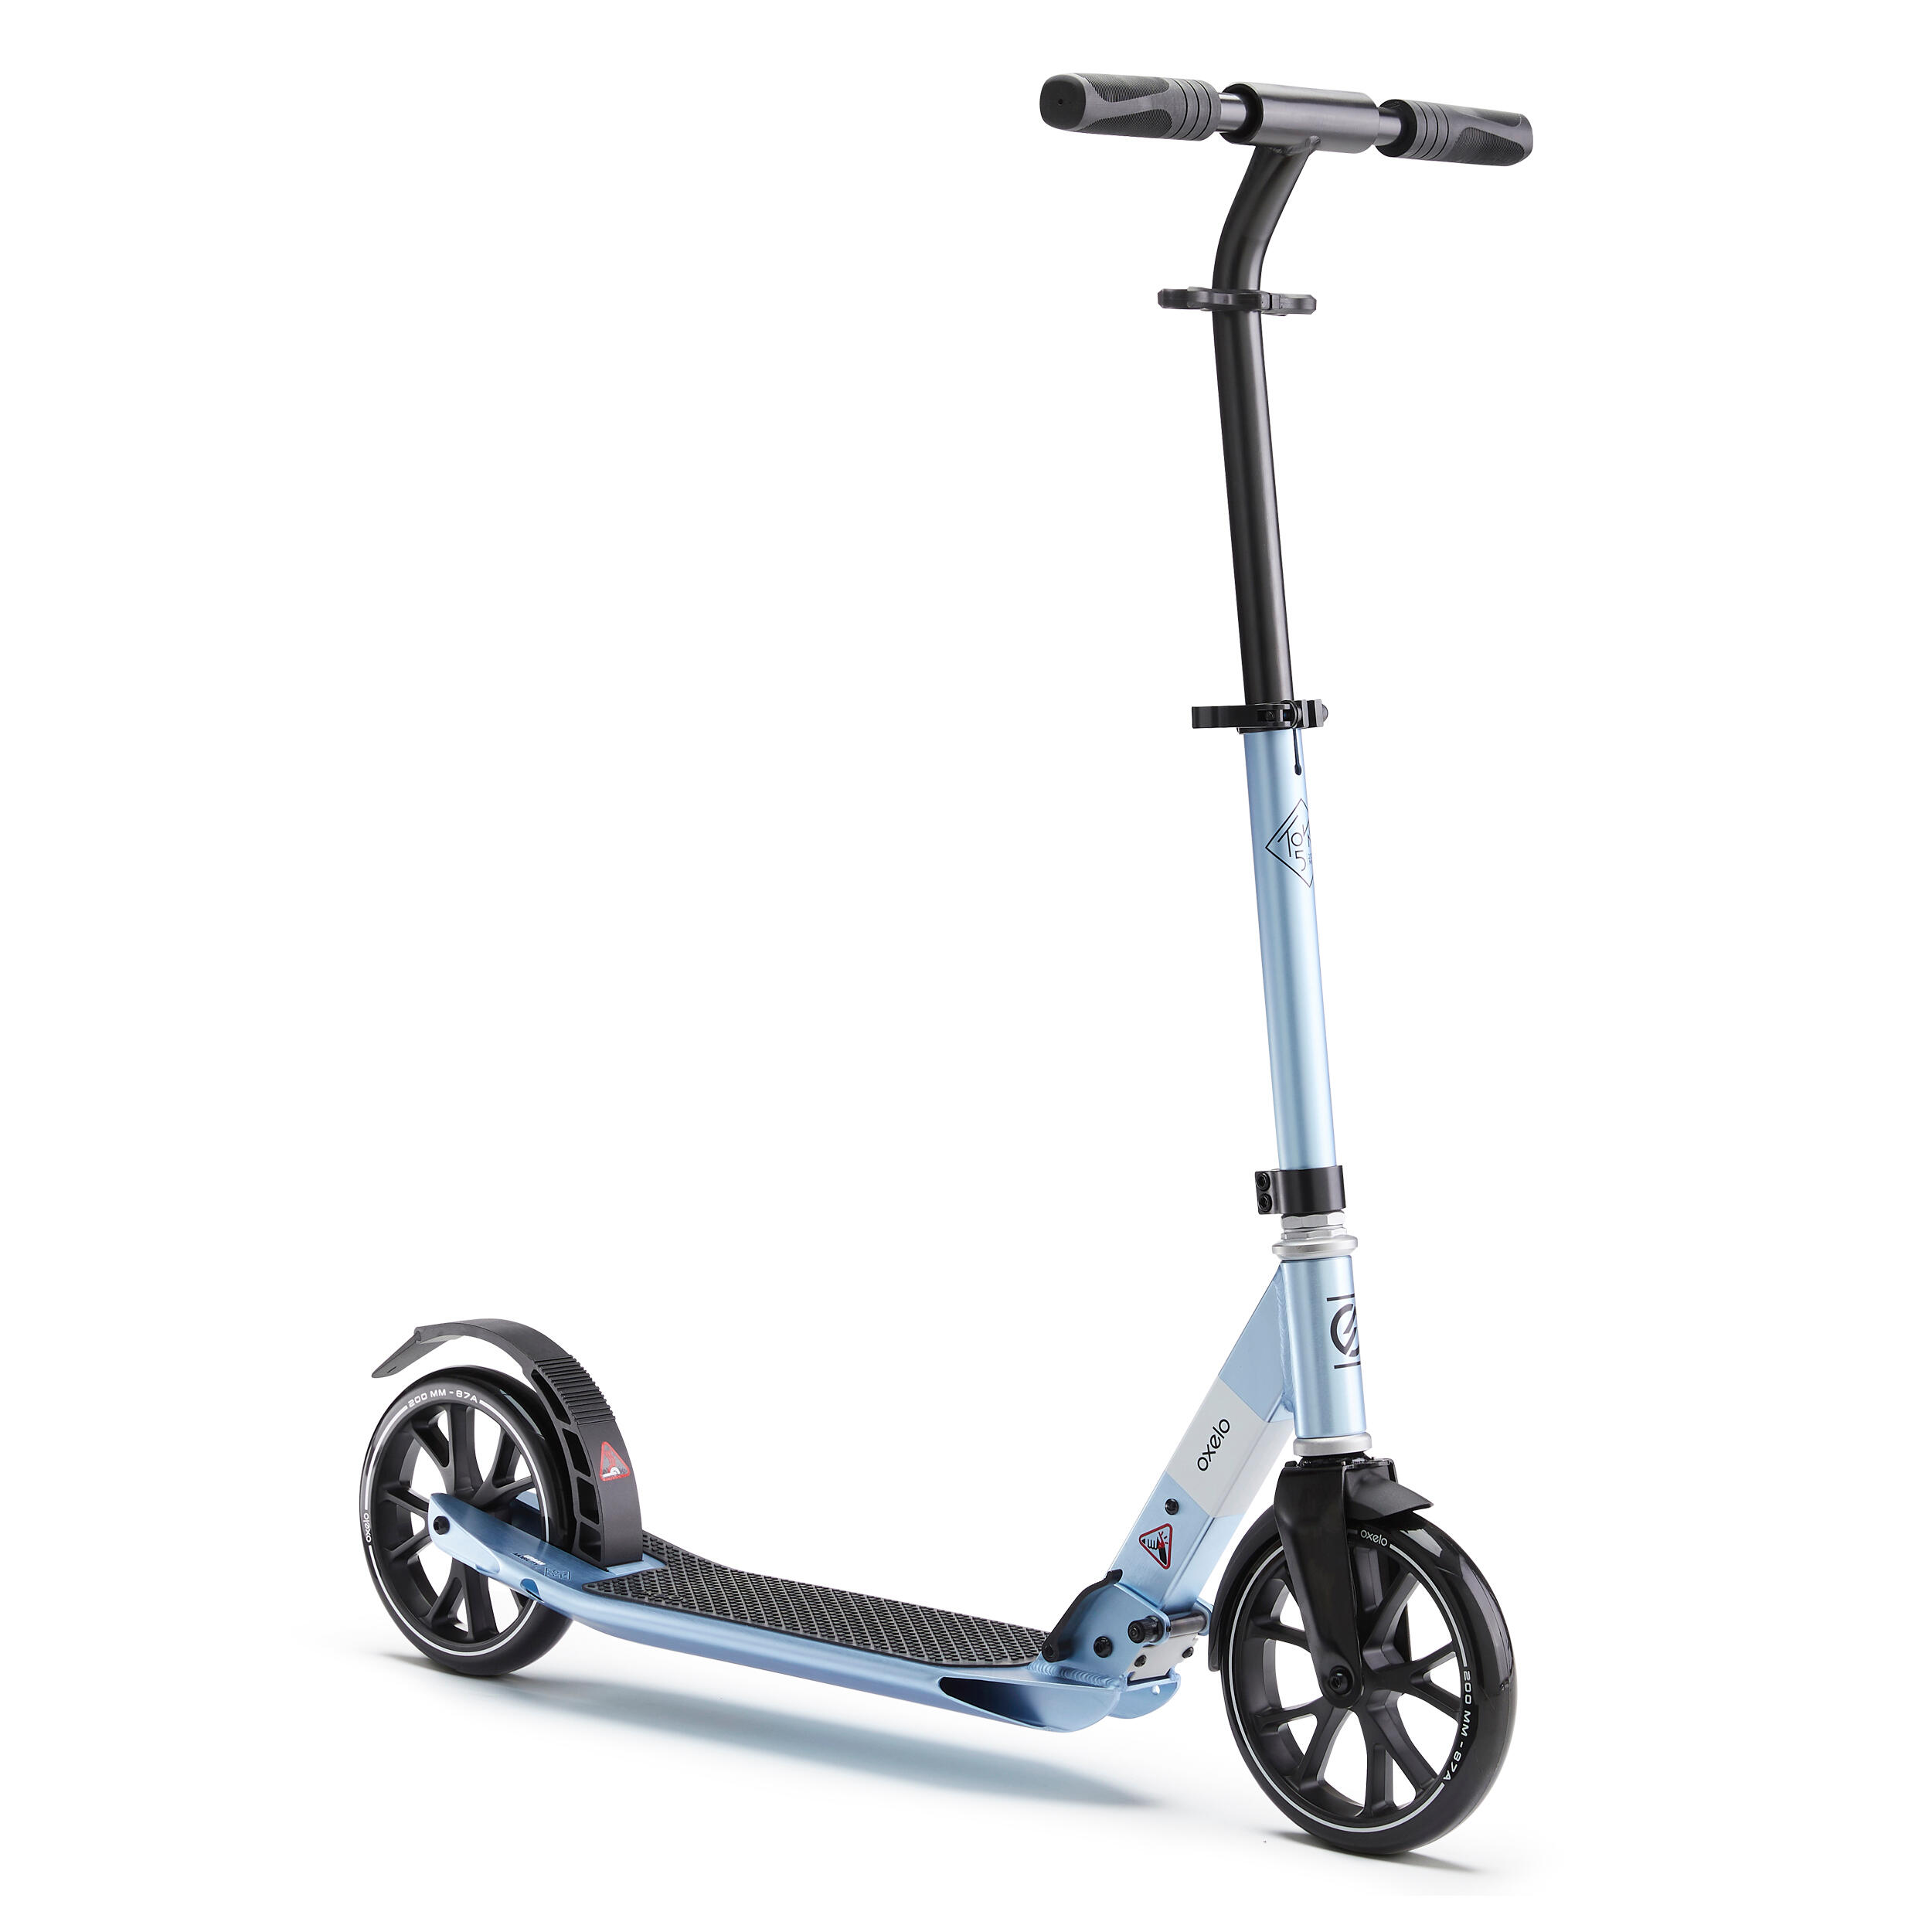 Town 5 XL Adult Scooter - Blue 1/10